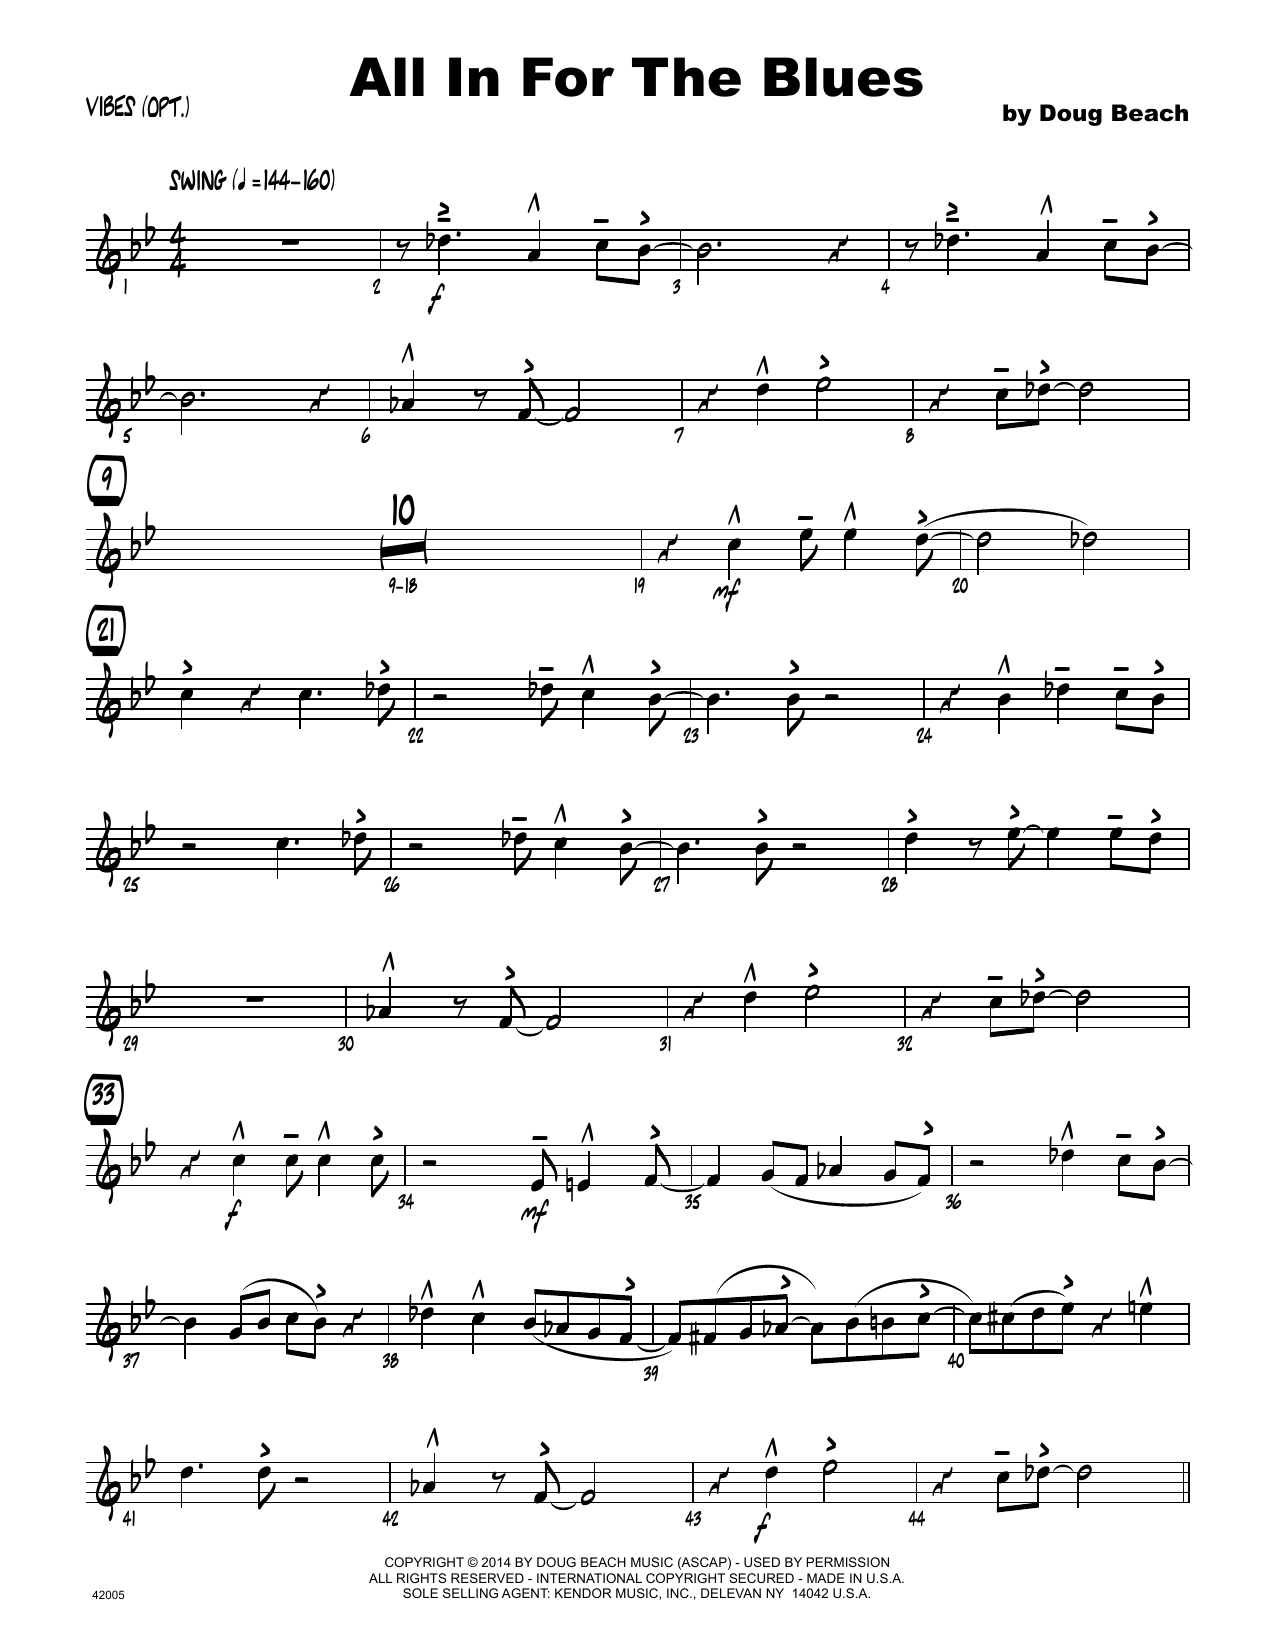 Download Doug Beach All In For The Blues - Vibes Sheet Music